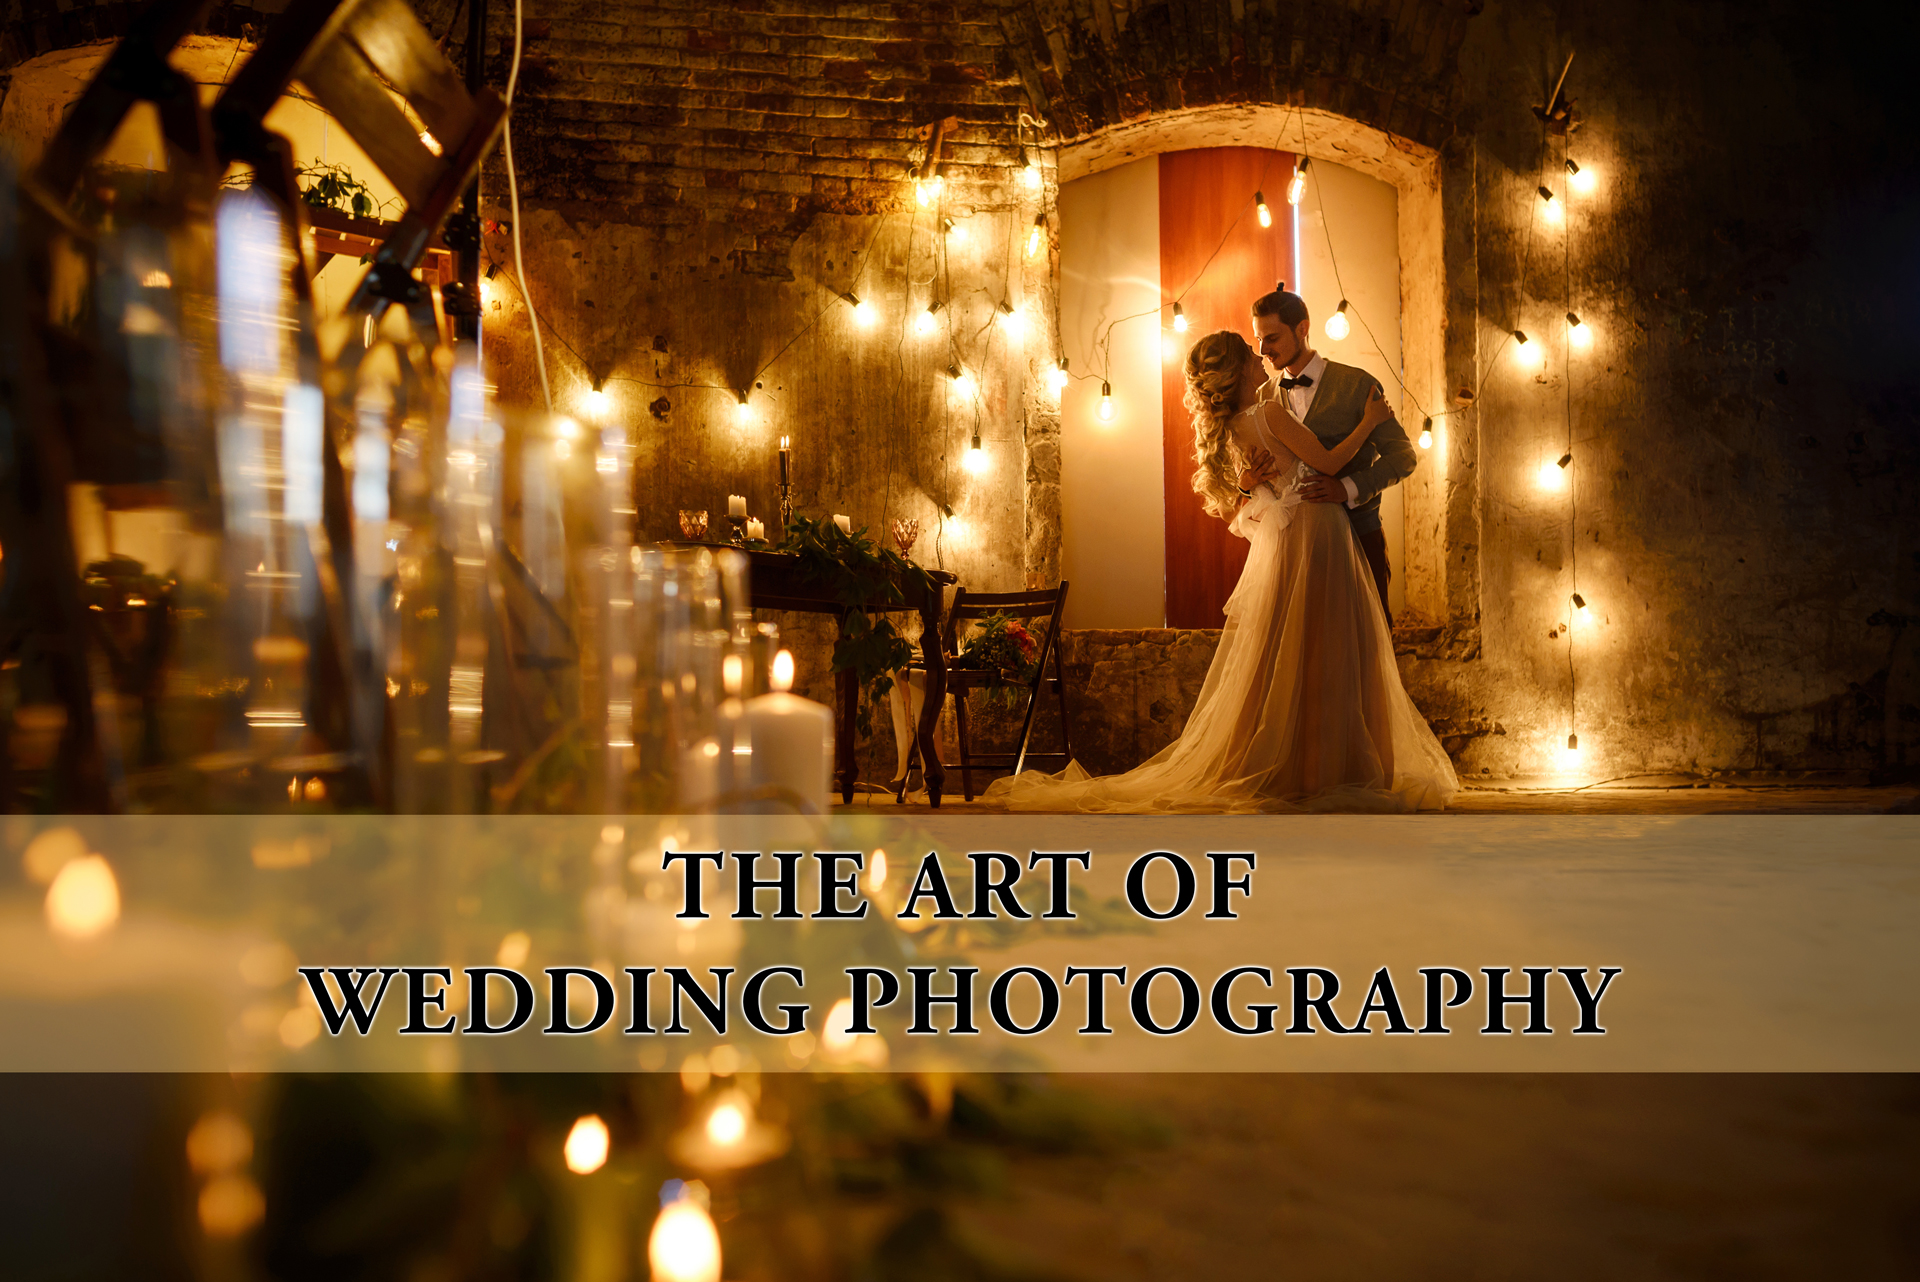 How to Master the Art of Wedding Photography